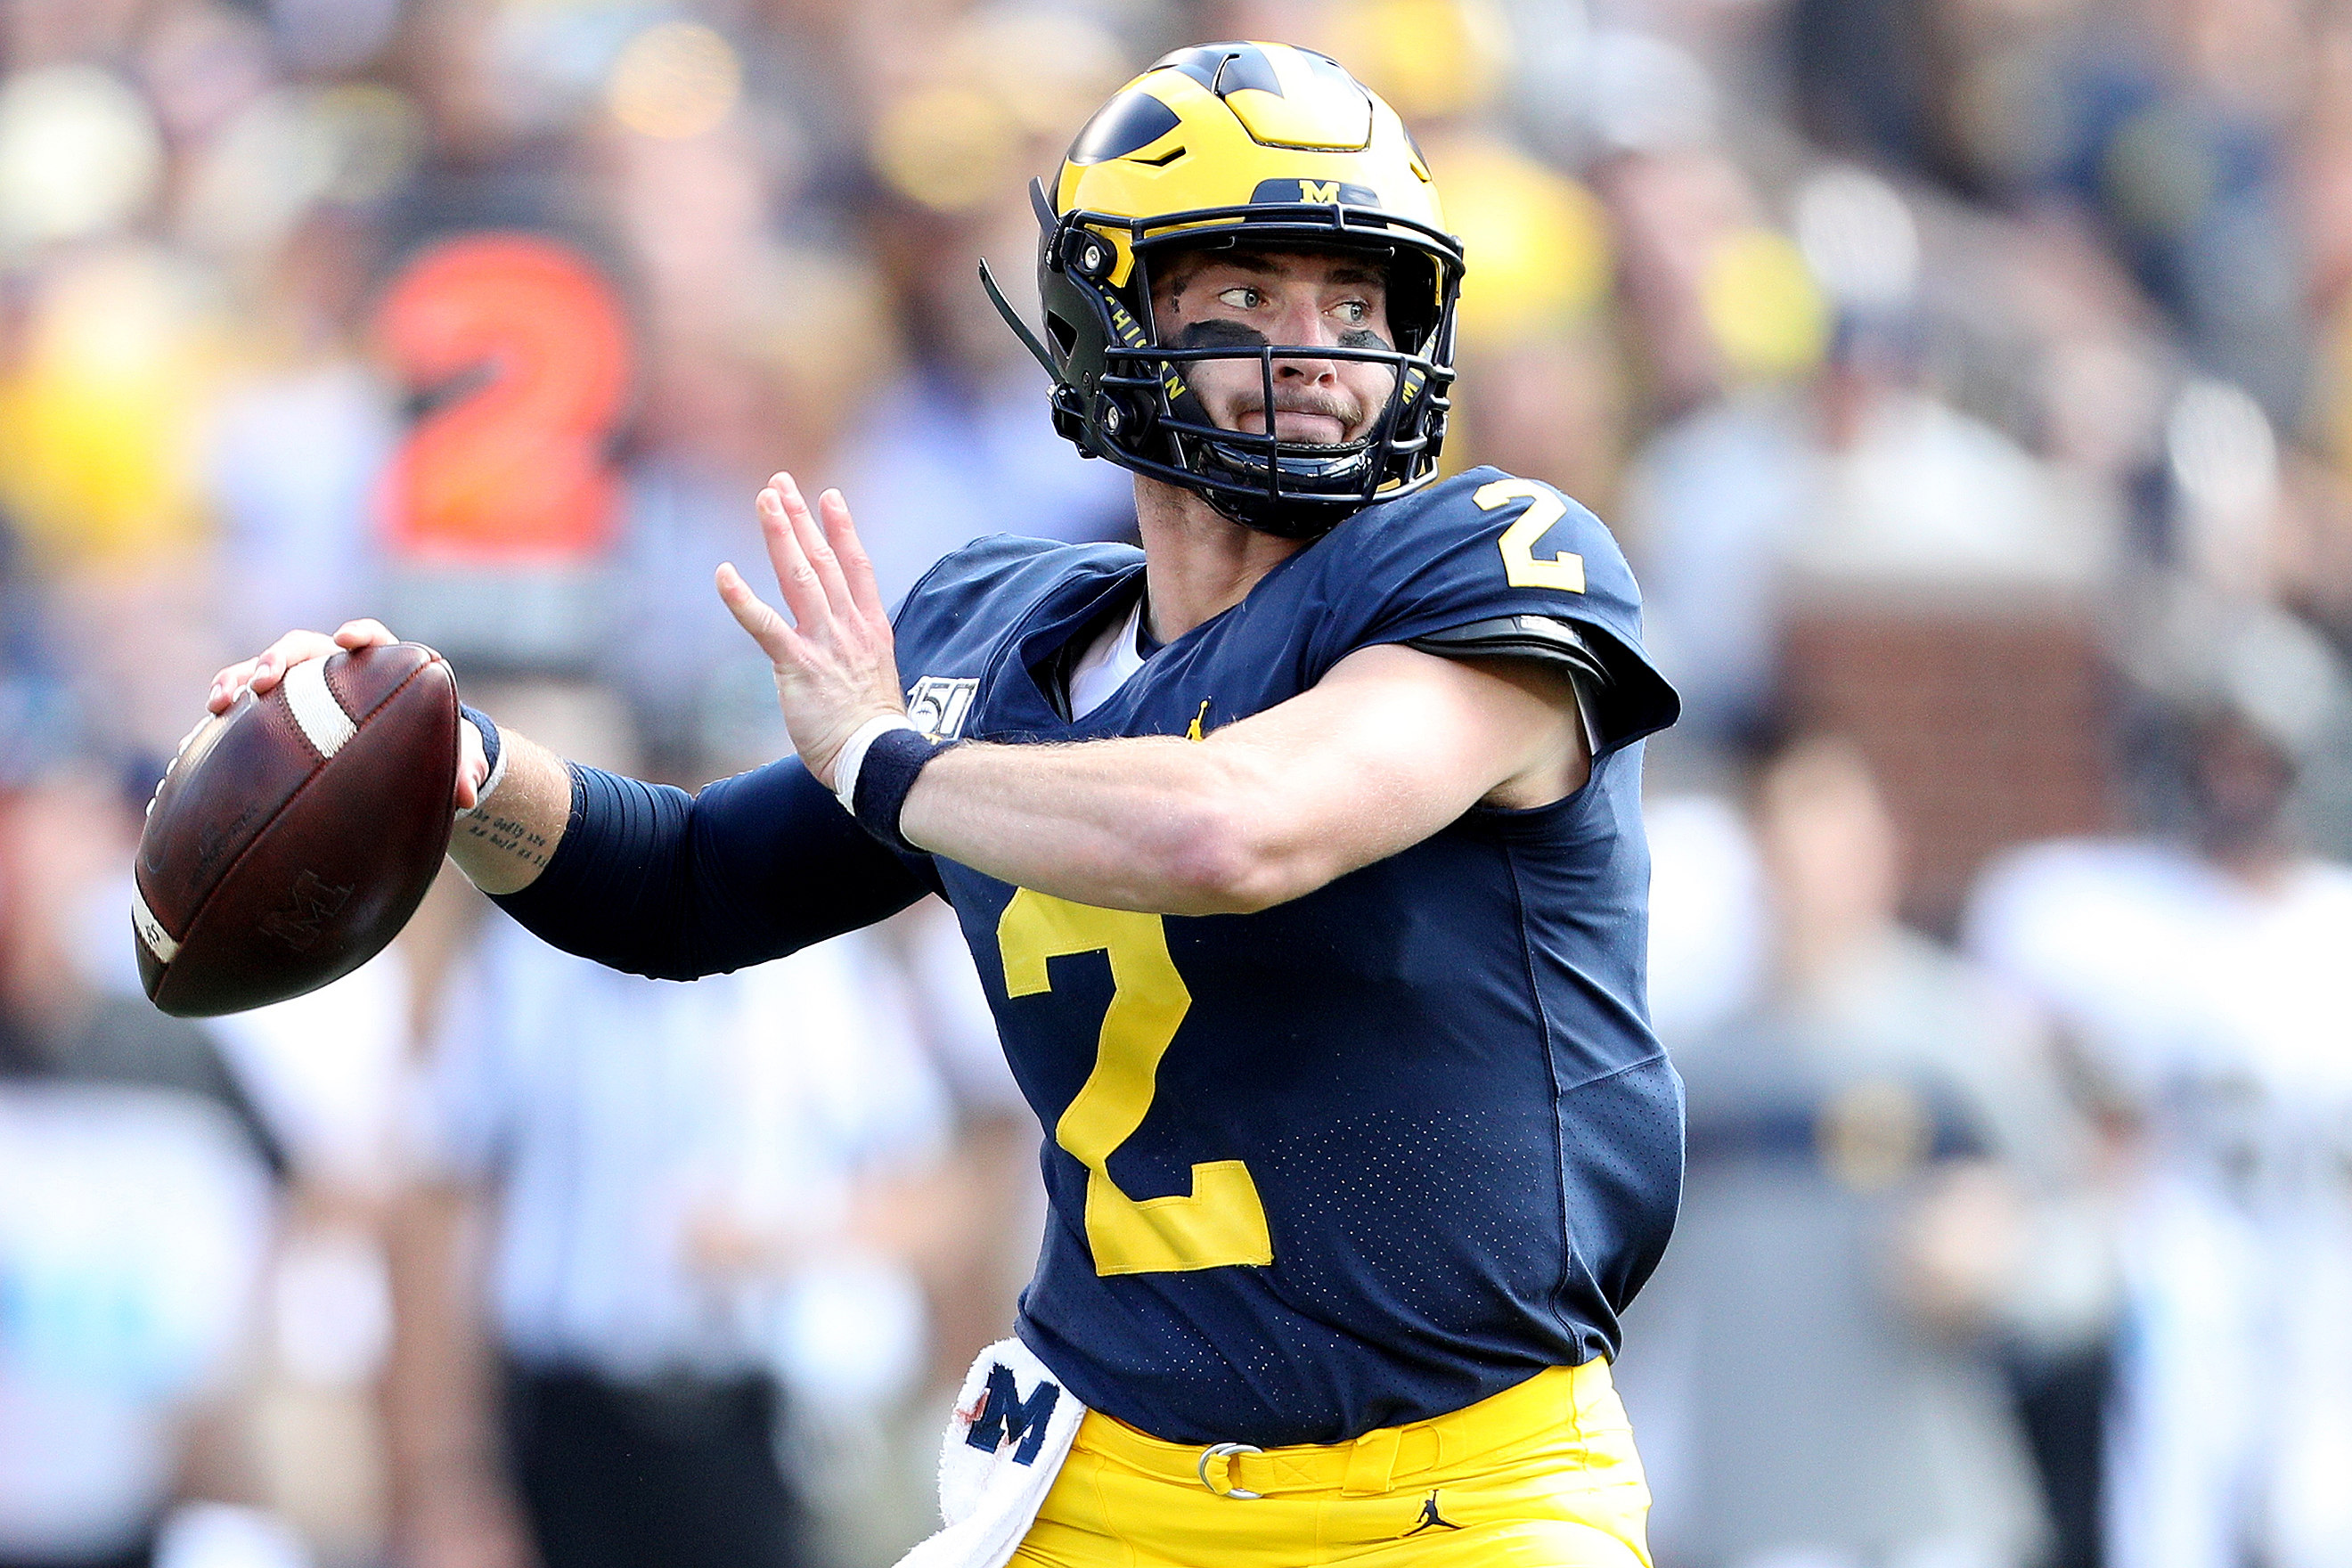 Michigan Panthers select QB Shea Patterson No. 1 overall in USFL draft 